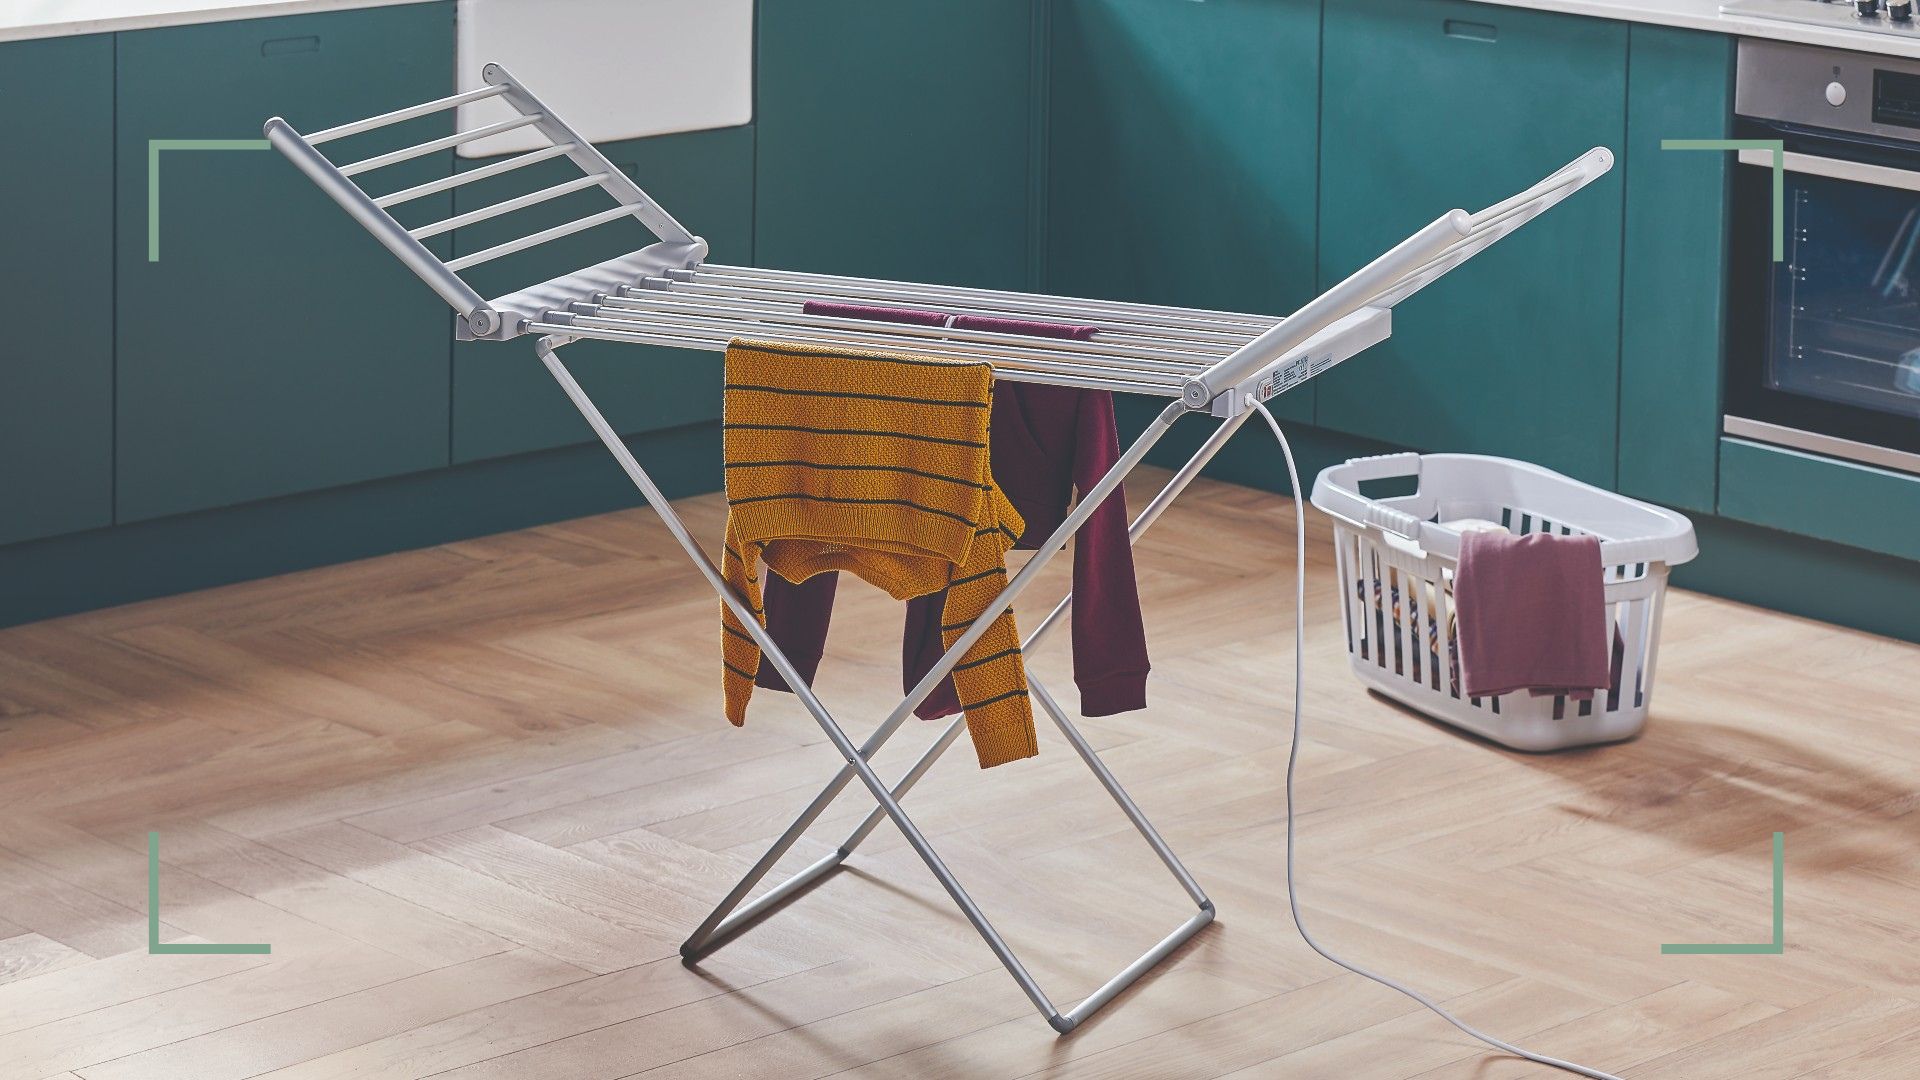 How much does a heated clothes airer cost to run?